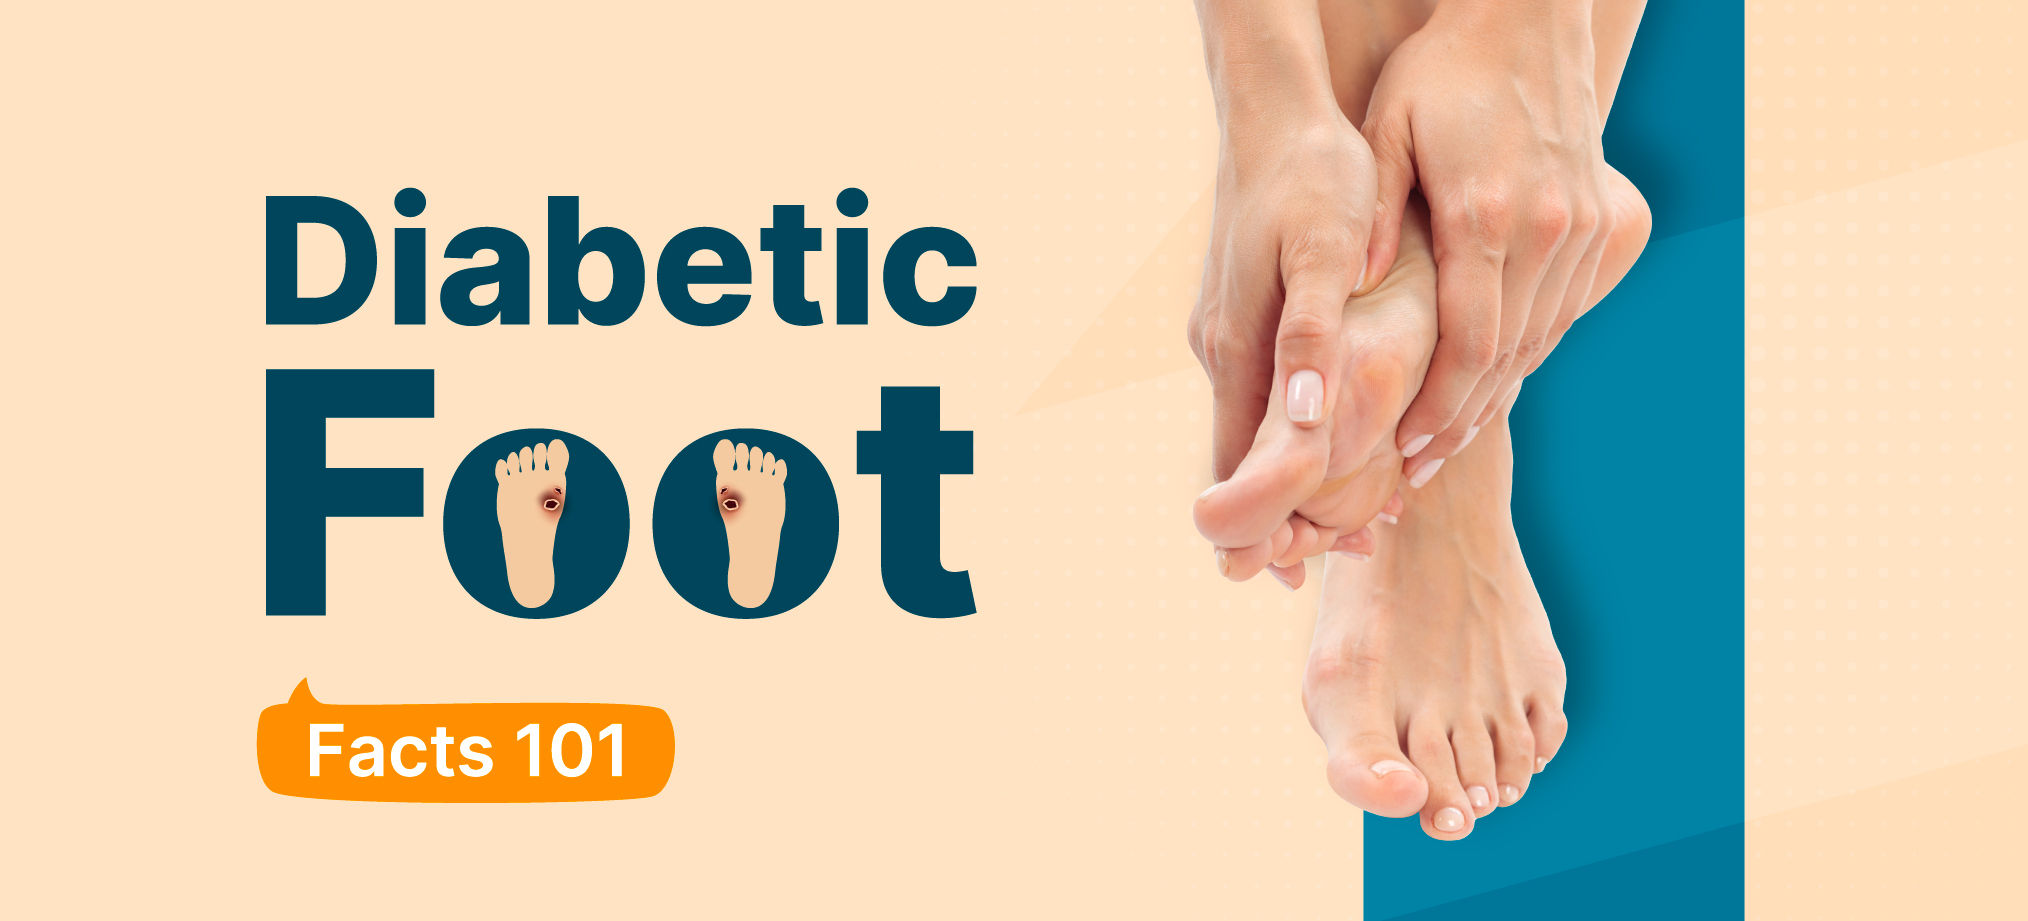 Prevention Tips For Diabetes Foot Infection